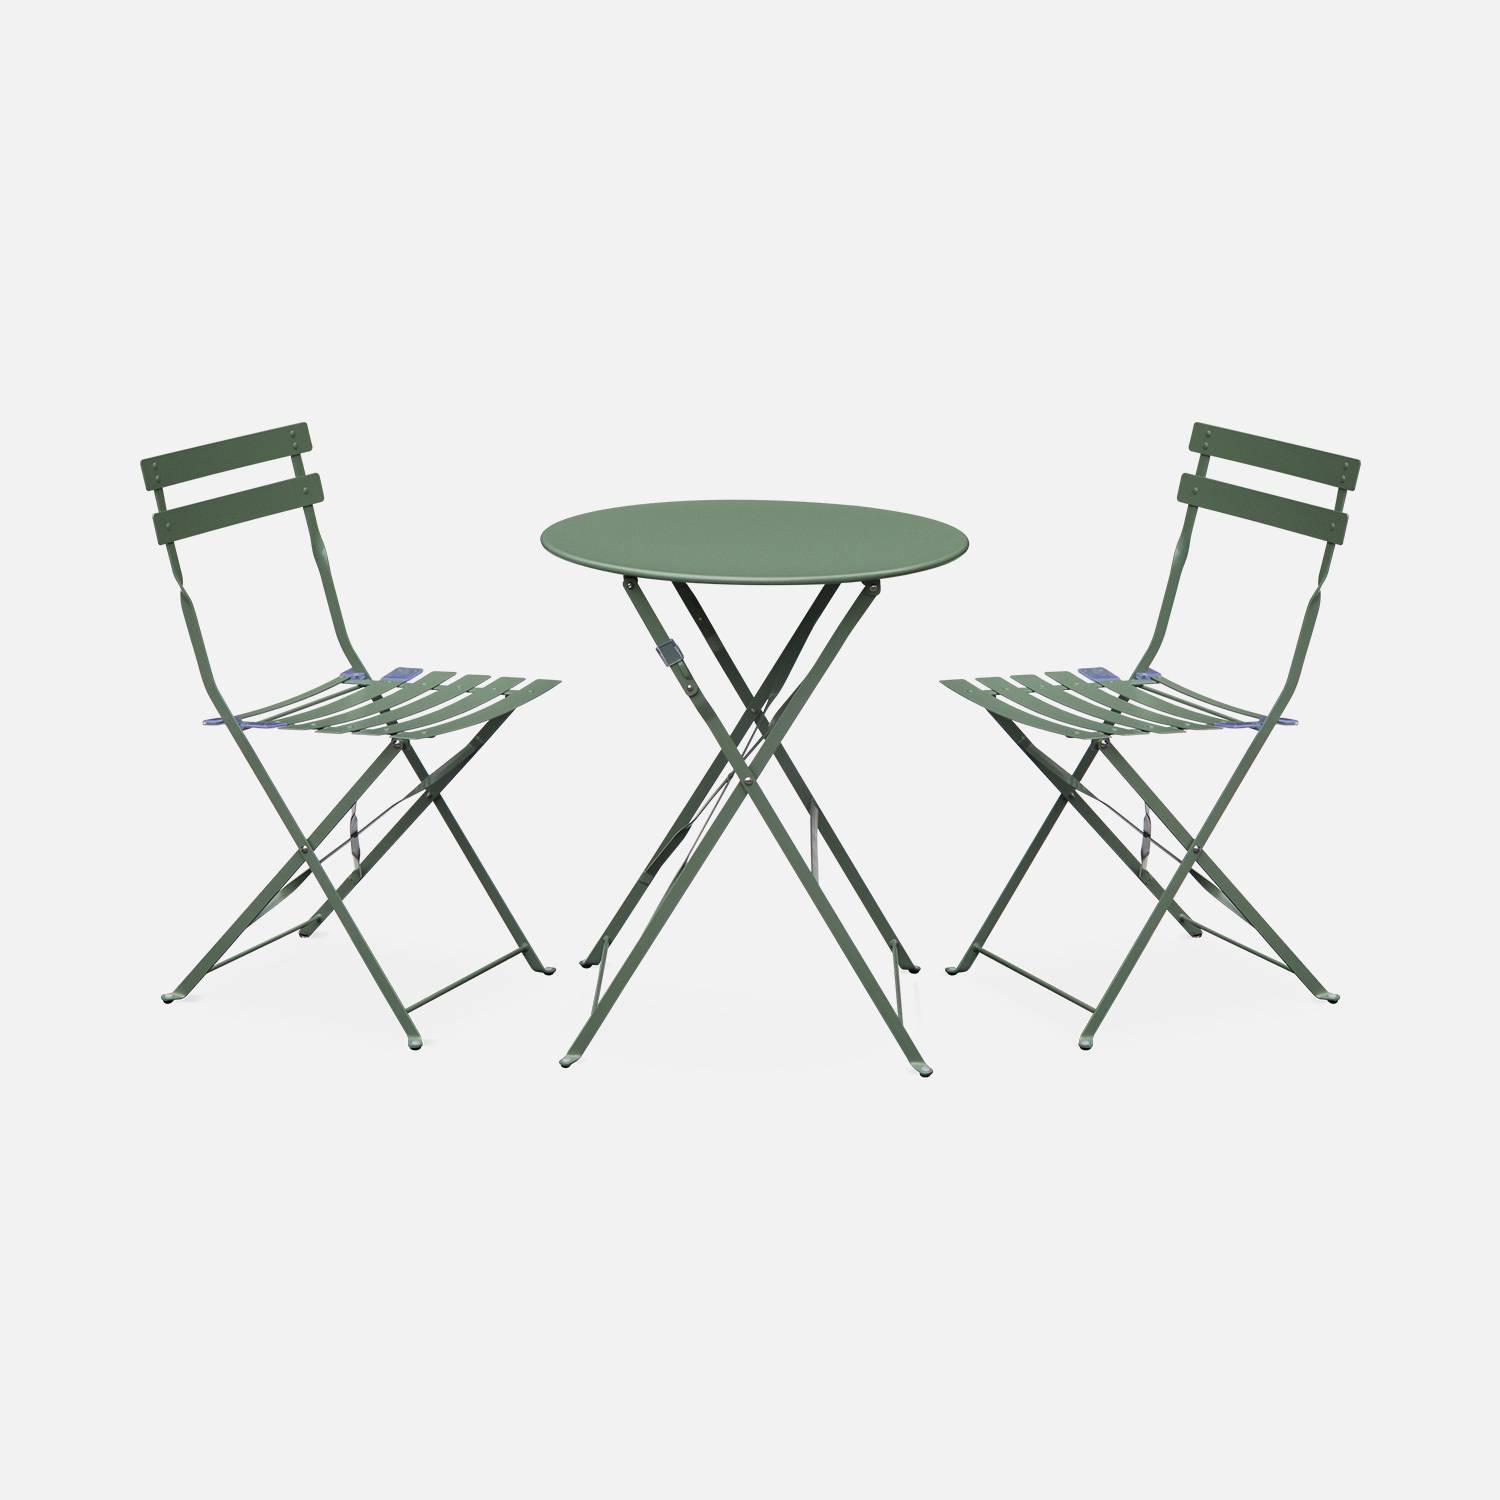 2-seater foldable thermo-lacquered steel bistro garden table with chairs, Ø60cm, Sage green | sweeek